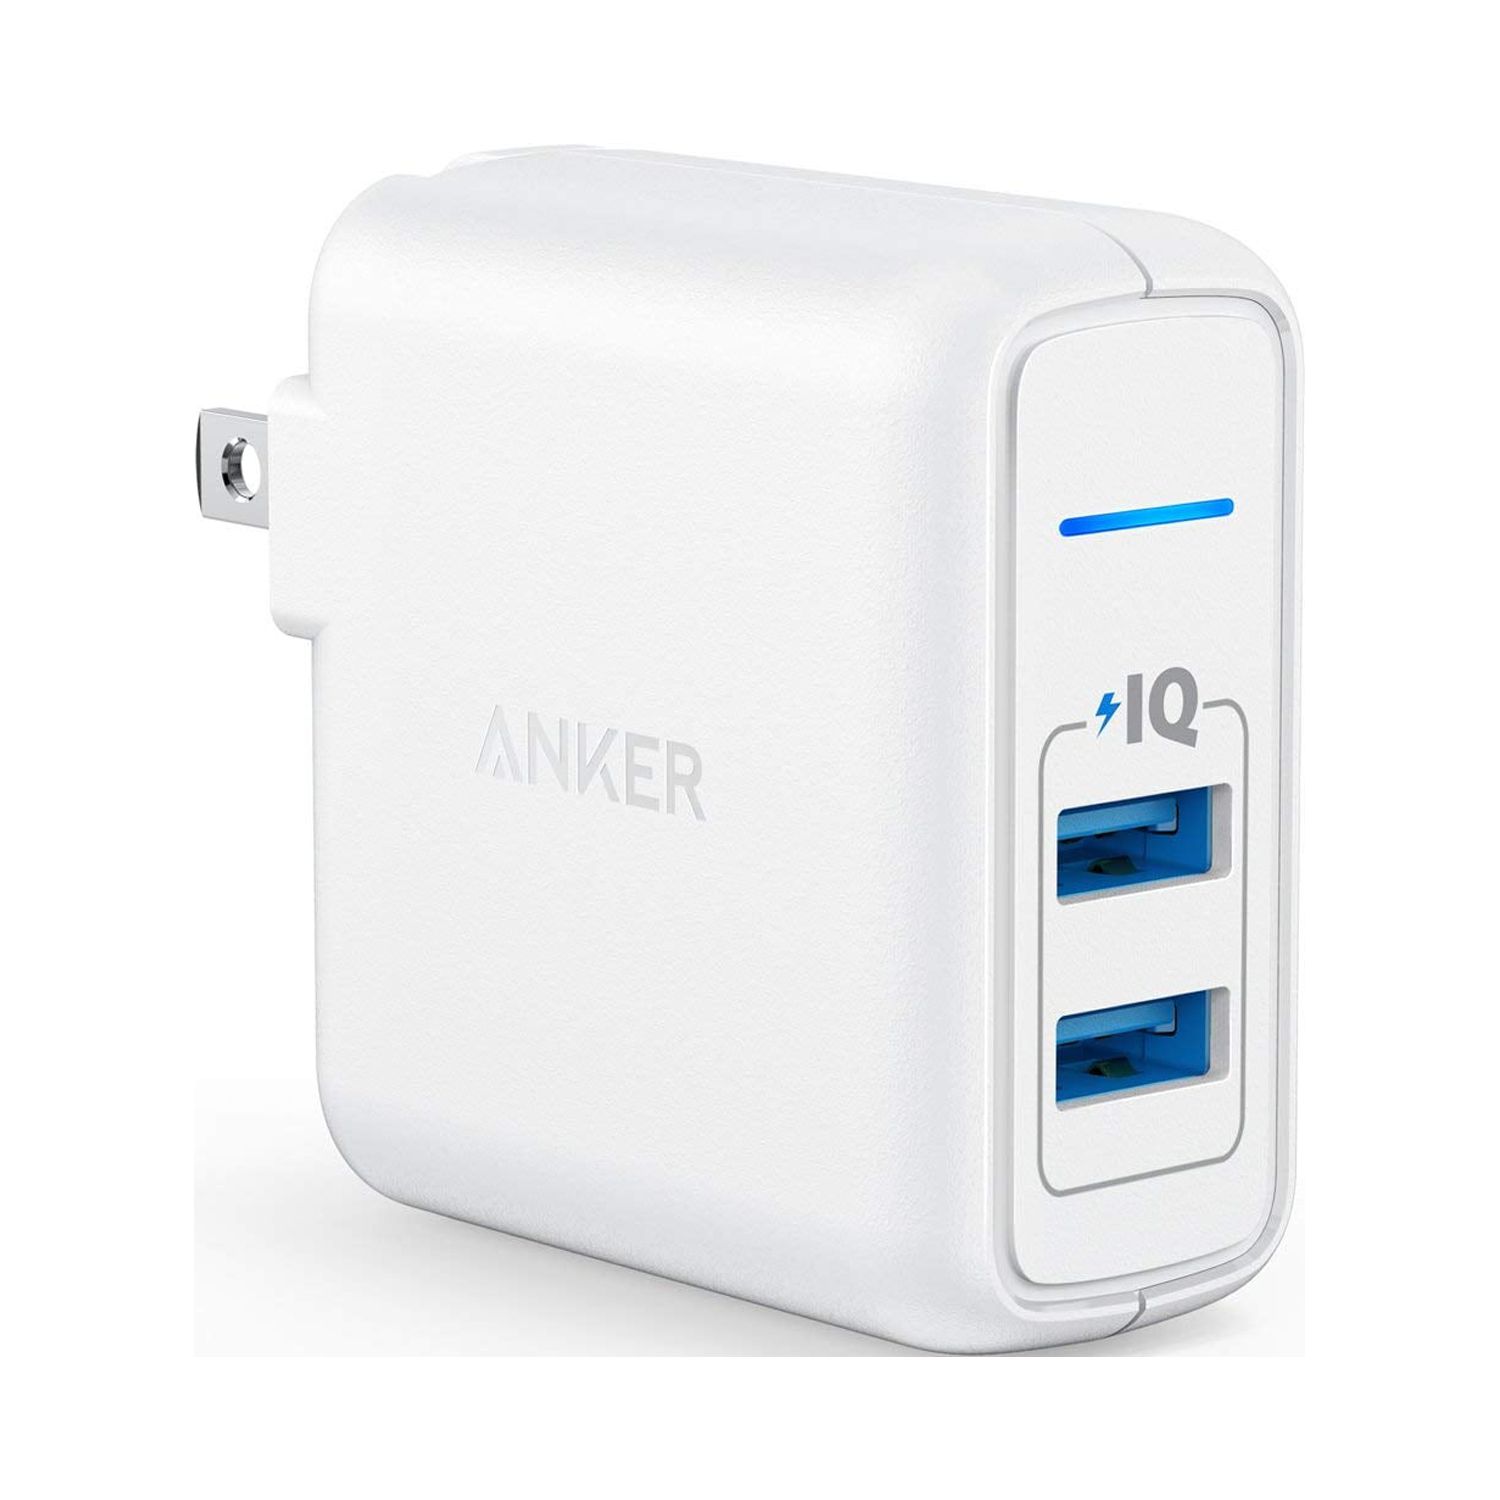 Anker Elite Dual Port 24W Wall Charger, PowerPort 2 with PowerIQ and Foldable Plug, for iPhone 11/XS/XS Max/XR/X/8/7/6/Plus, iPad Pro/Air 2/Mini 3/Mini 4, Samsung S4/S5, and More - image 1 of 7